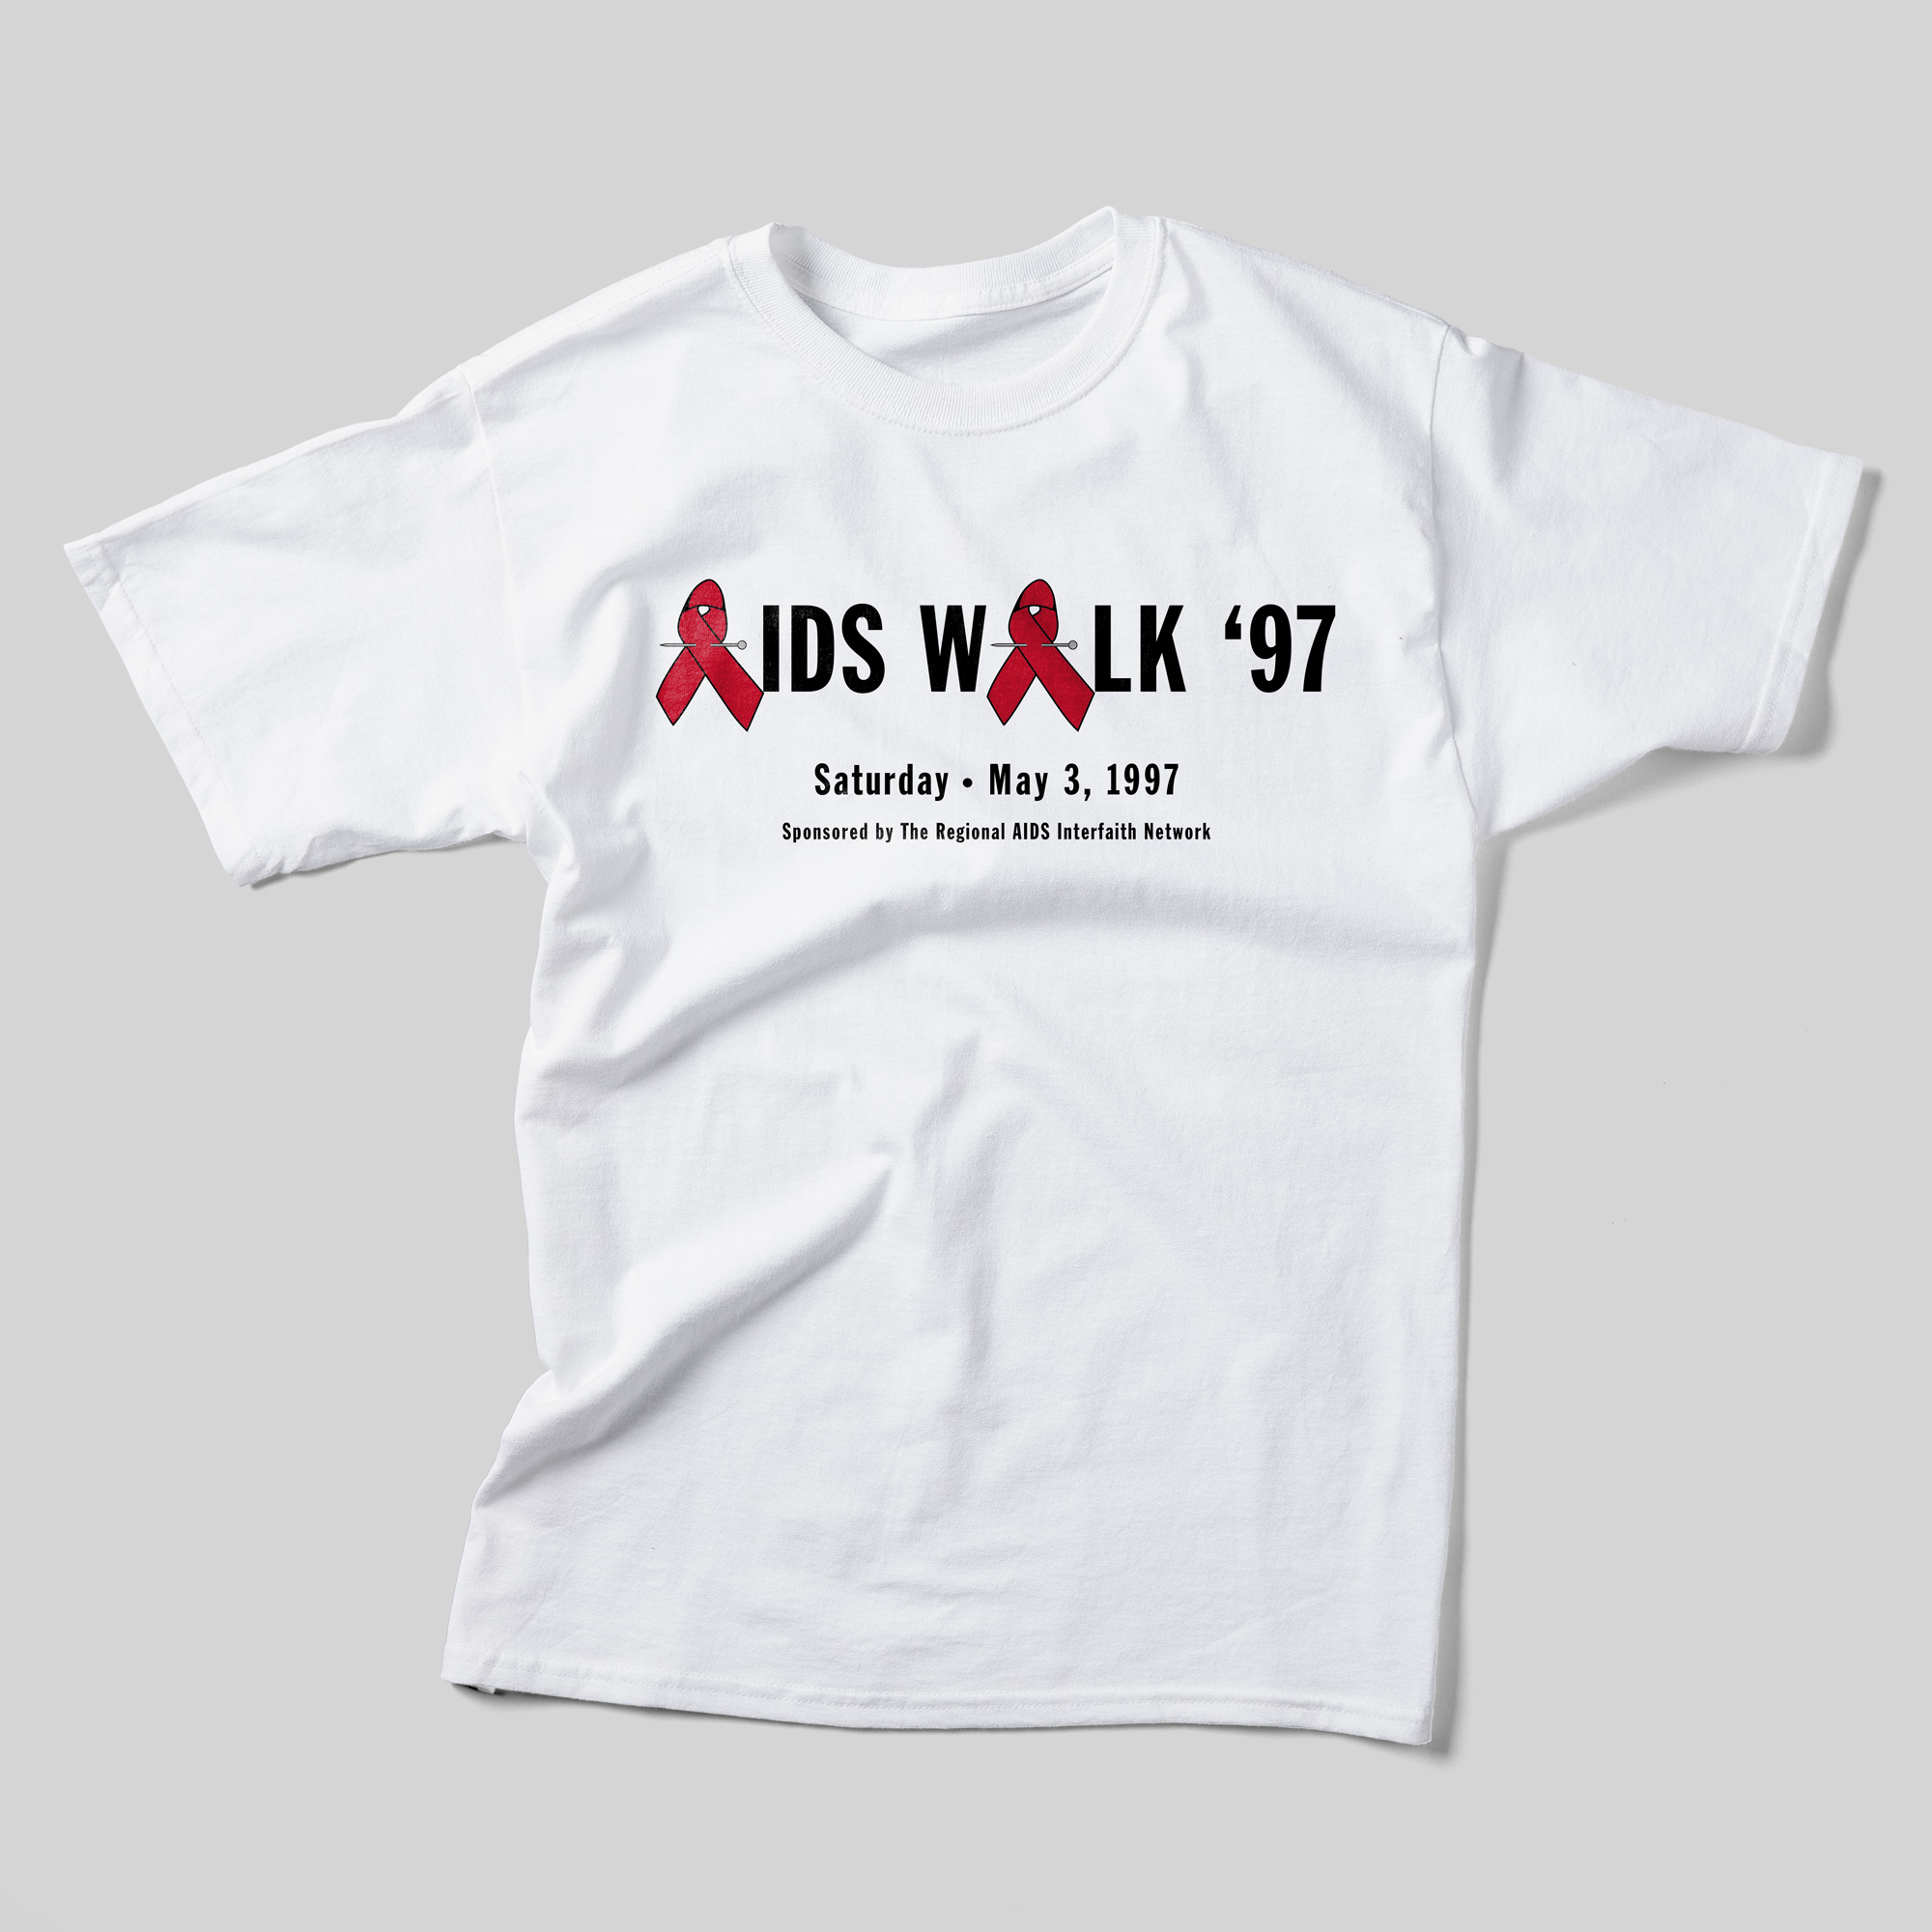 A white t-shirt that reads "AIDS Walk '97. Saturday, May 3, 1997. Sponsored by the Regional AIDS Interfaith Network" in black text. The A's in "AIDS" and "Walk" are red ribbon pins.